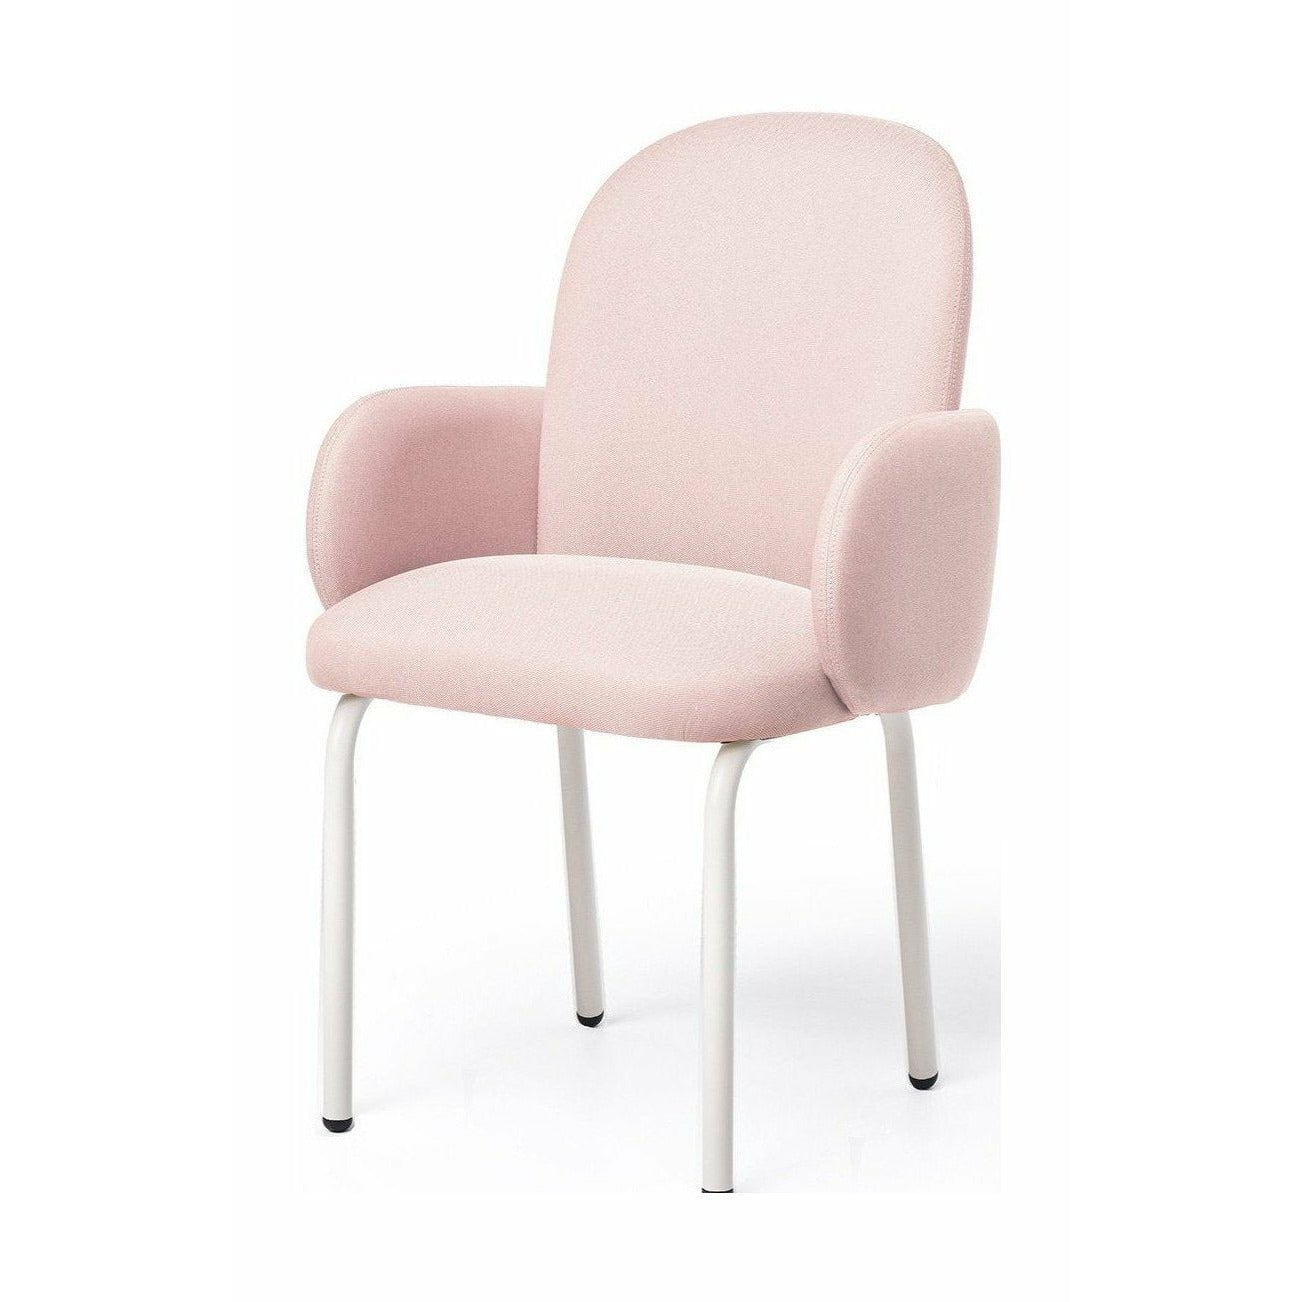 Puik Dost Dost Chair Steel, rose